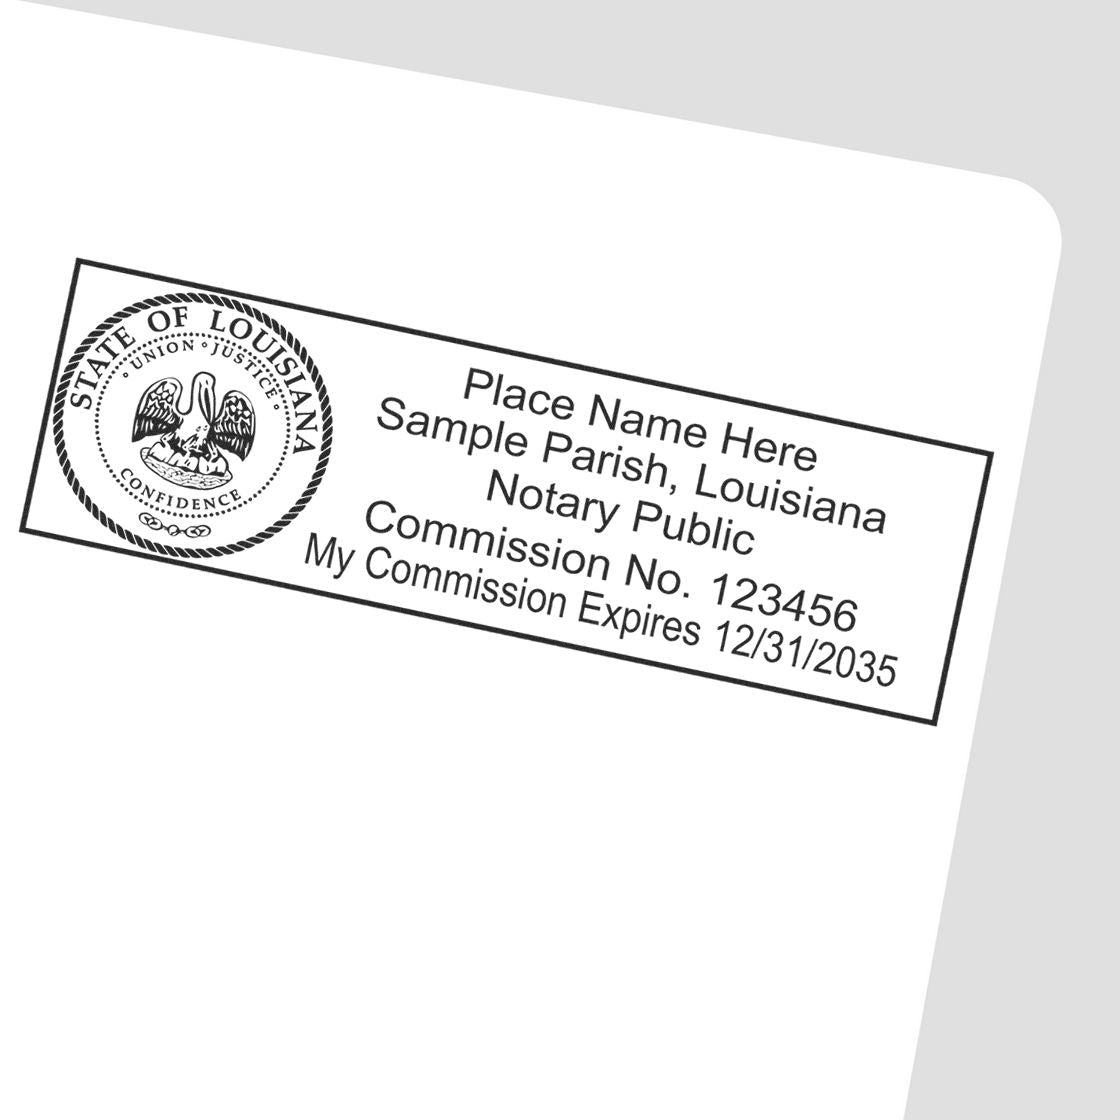 Another Example of a stamped impression of the Heavy-Duty Louisiana Rectangular Notary Stamp on a piece of office paper.